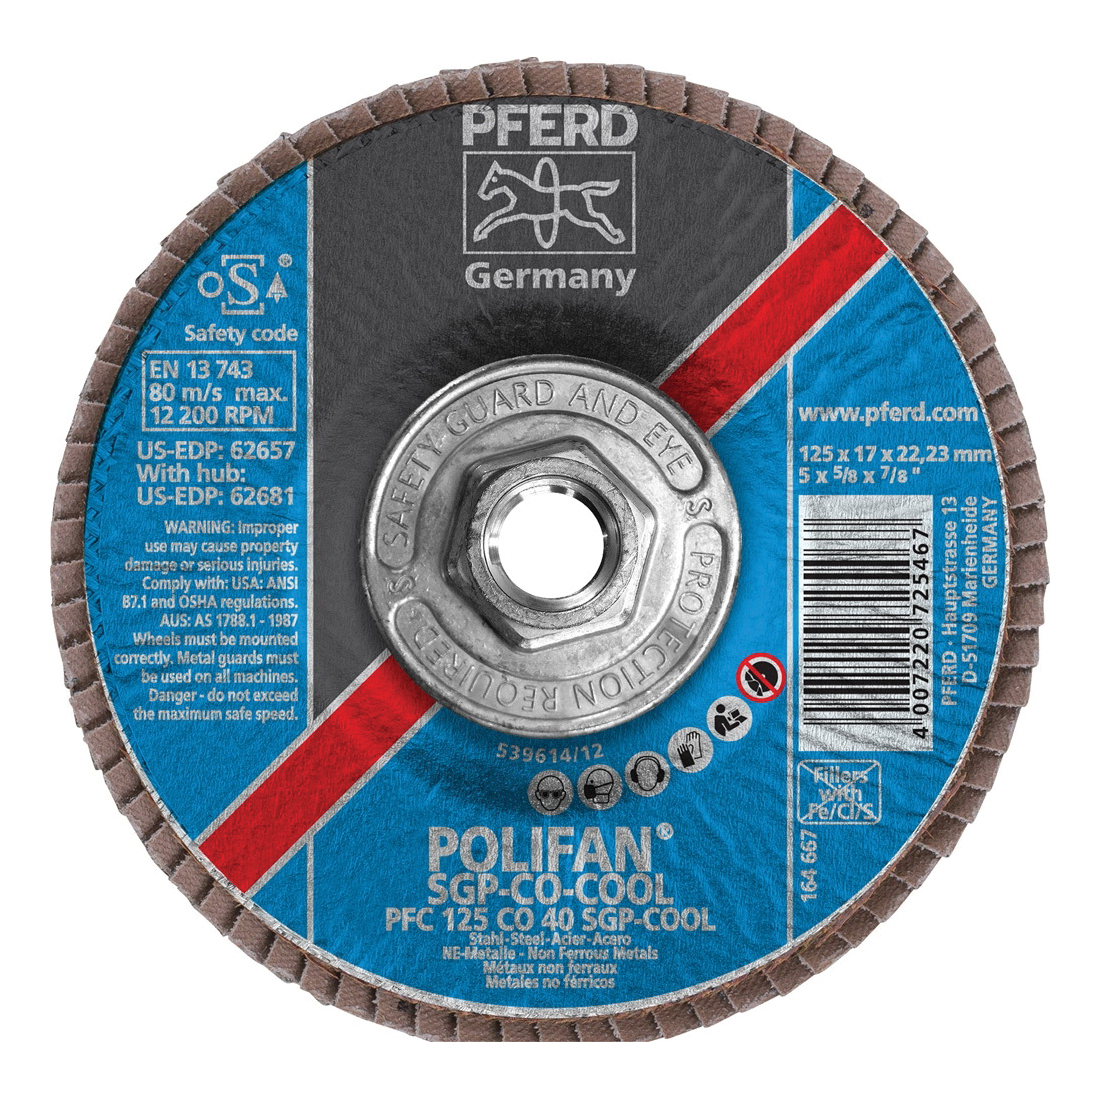 PFERD Polifan® 62681 Special Line SGP CO-COOL Threaded Coated Abrasive Flap Disc, 5 in Dia, 40 Grit, Ceramic Oxide Abrasive, Type 29 Conical Disc